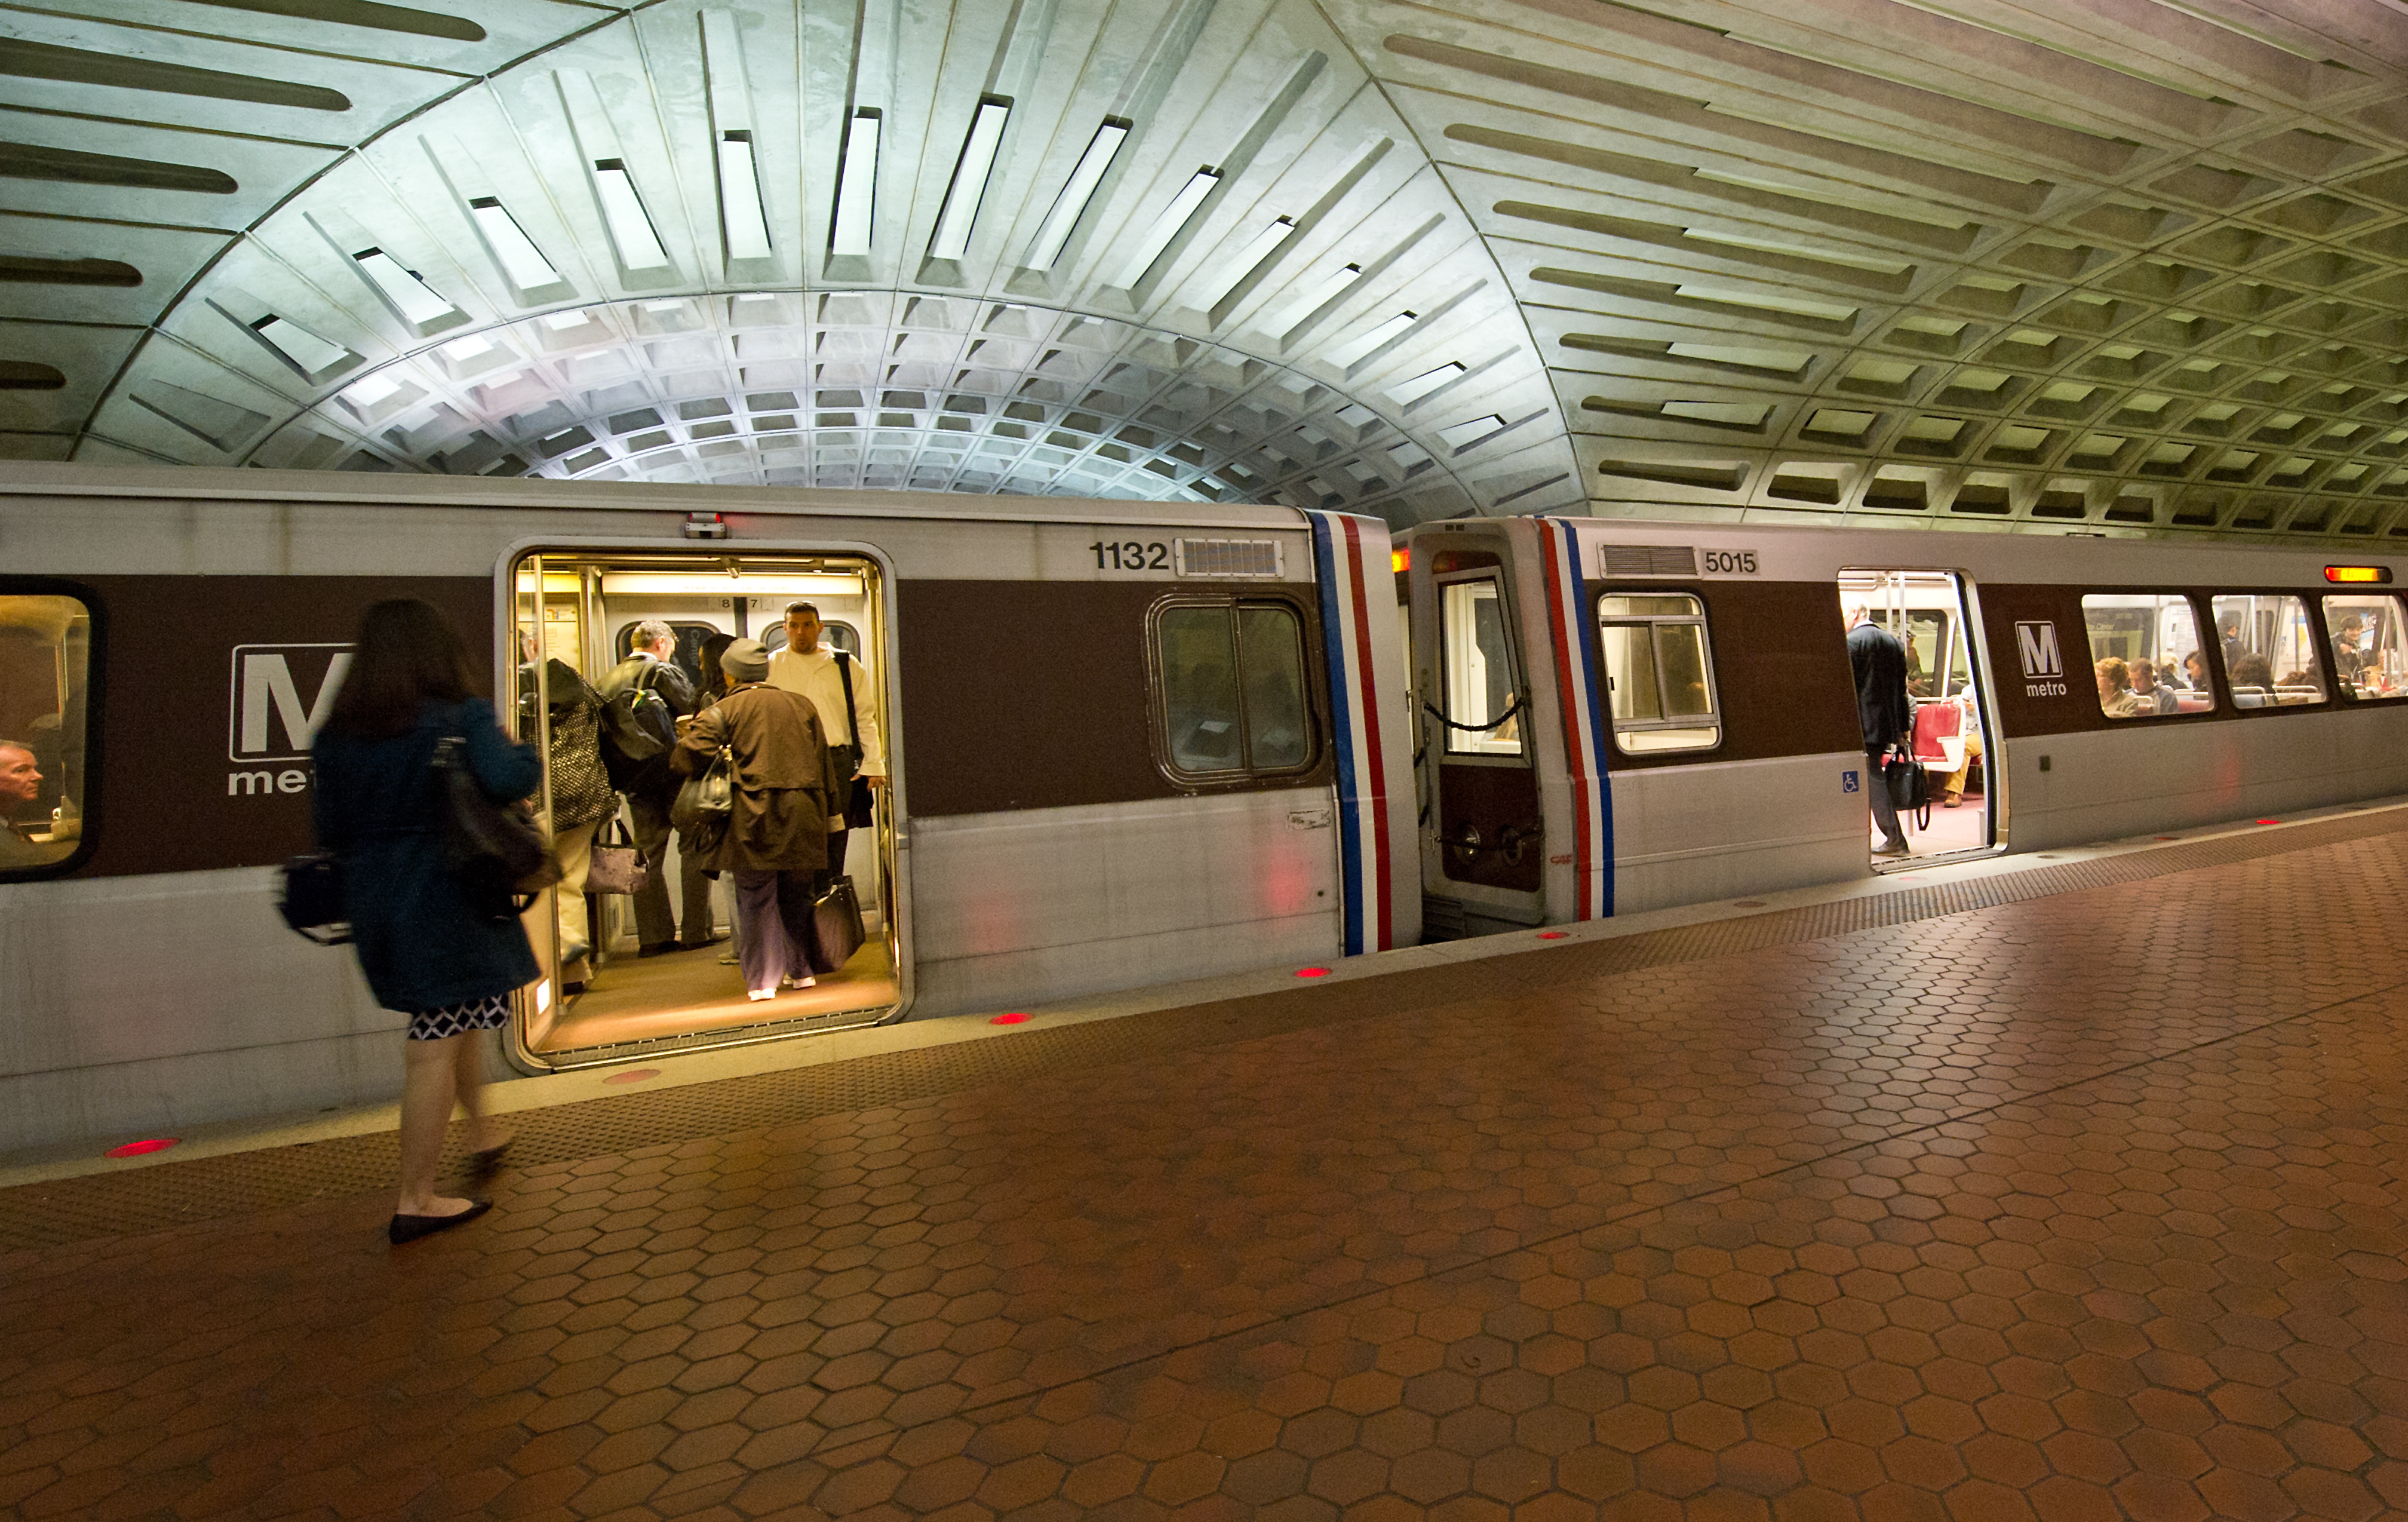 Entire . Metro subway to shut down for inspections - CBS News